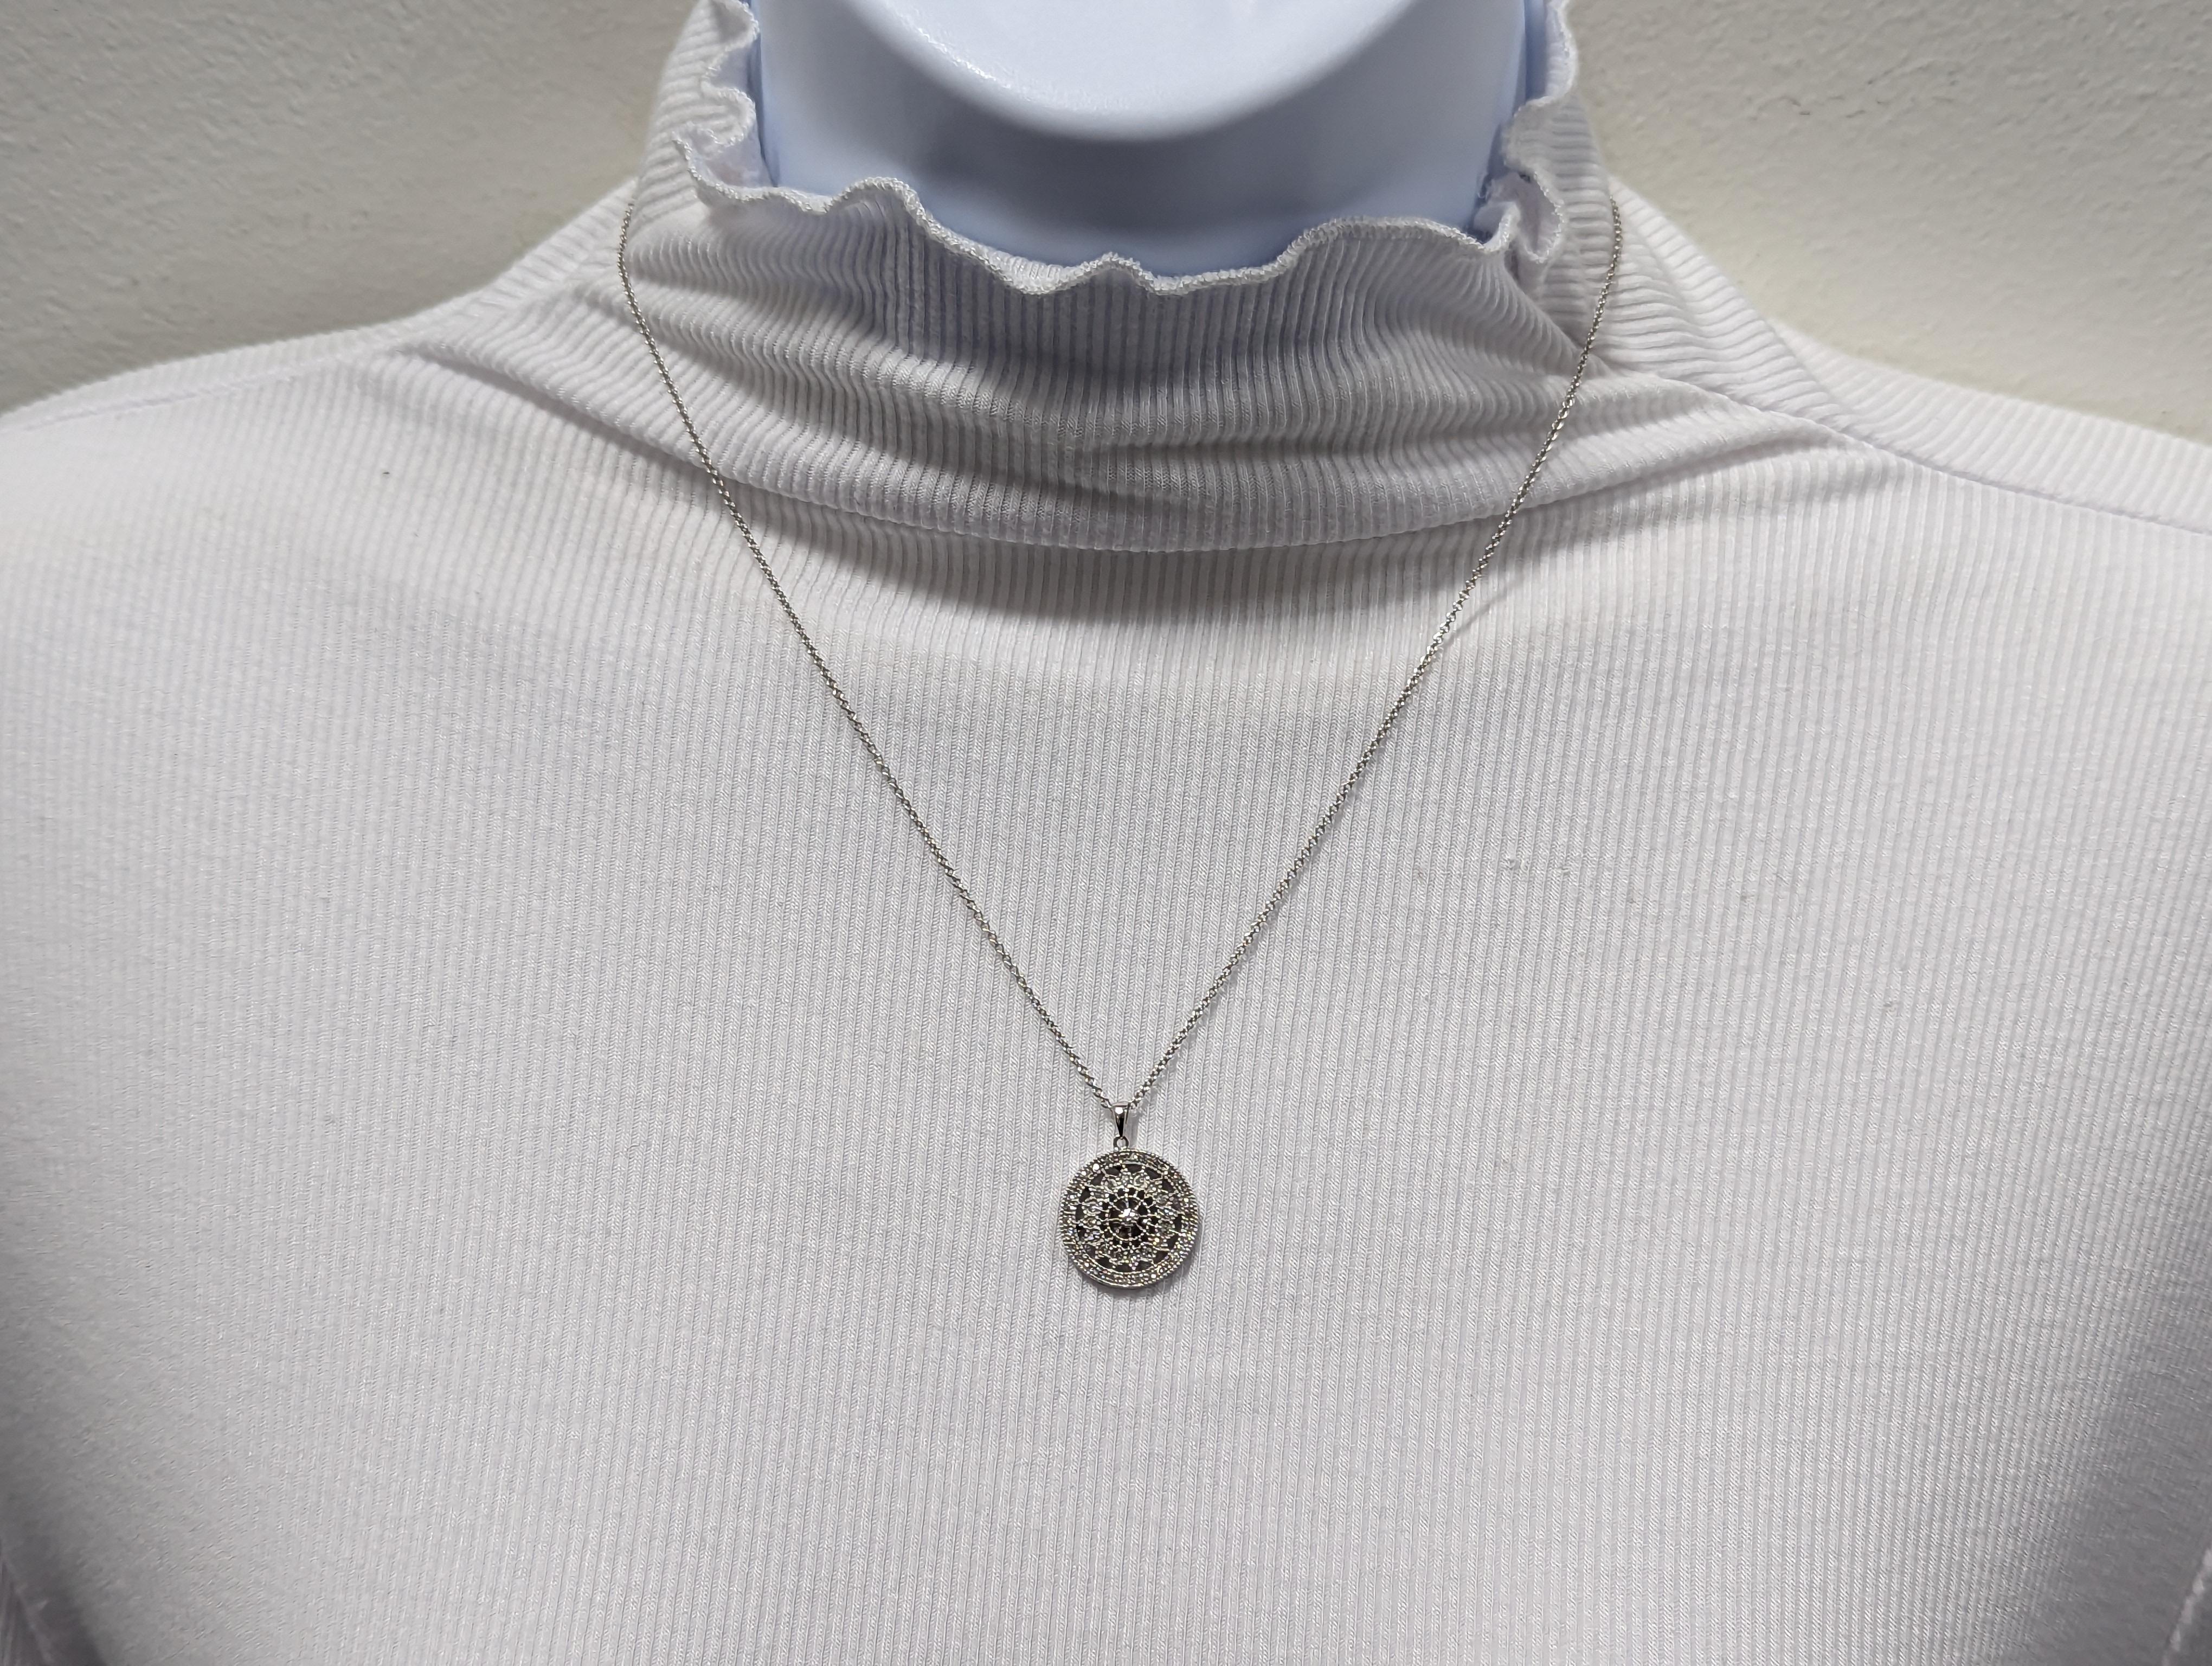 Beautiful pendant necklace with 0.30 ct. good quality white diamond rounds.  Length of chain is 18